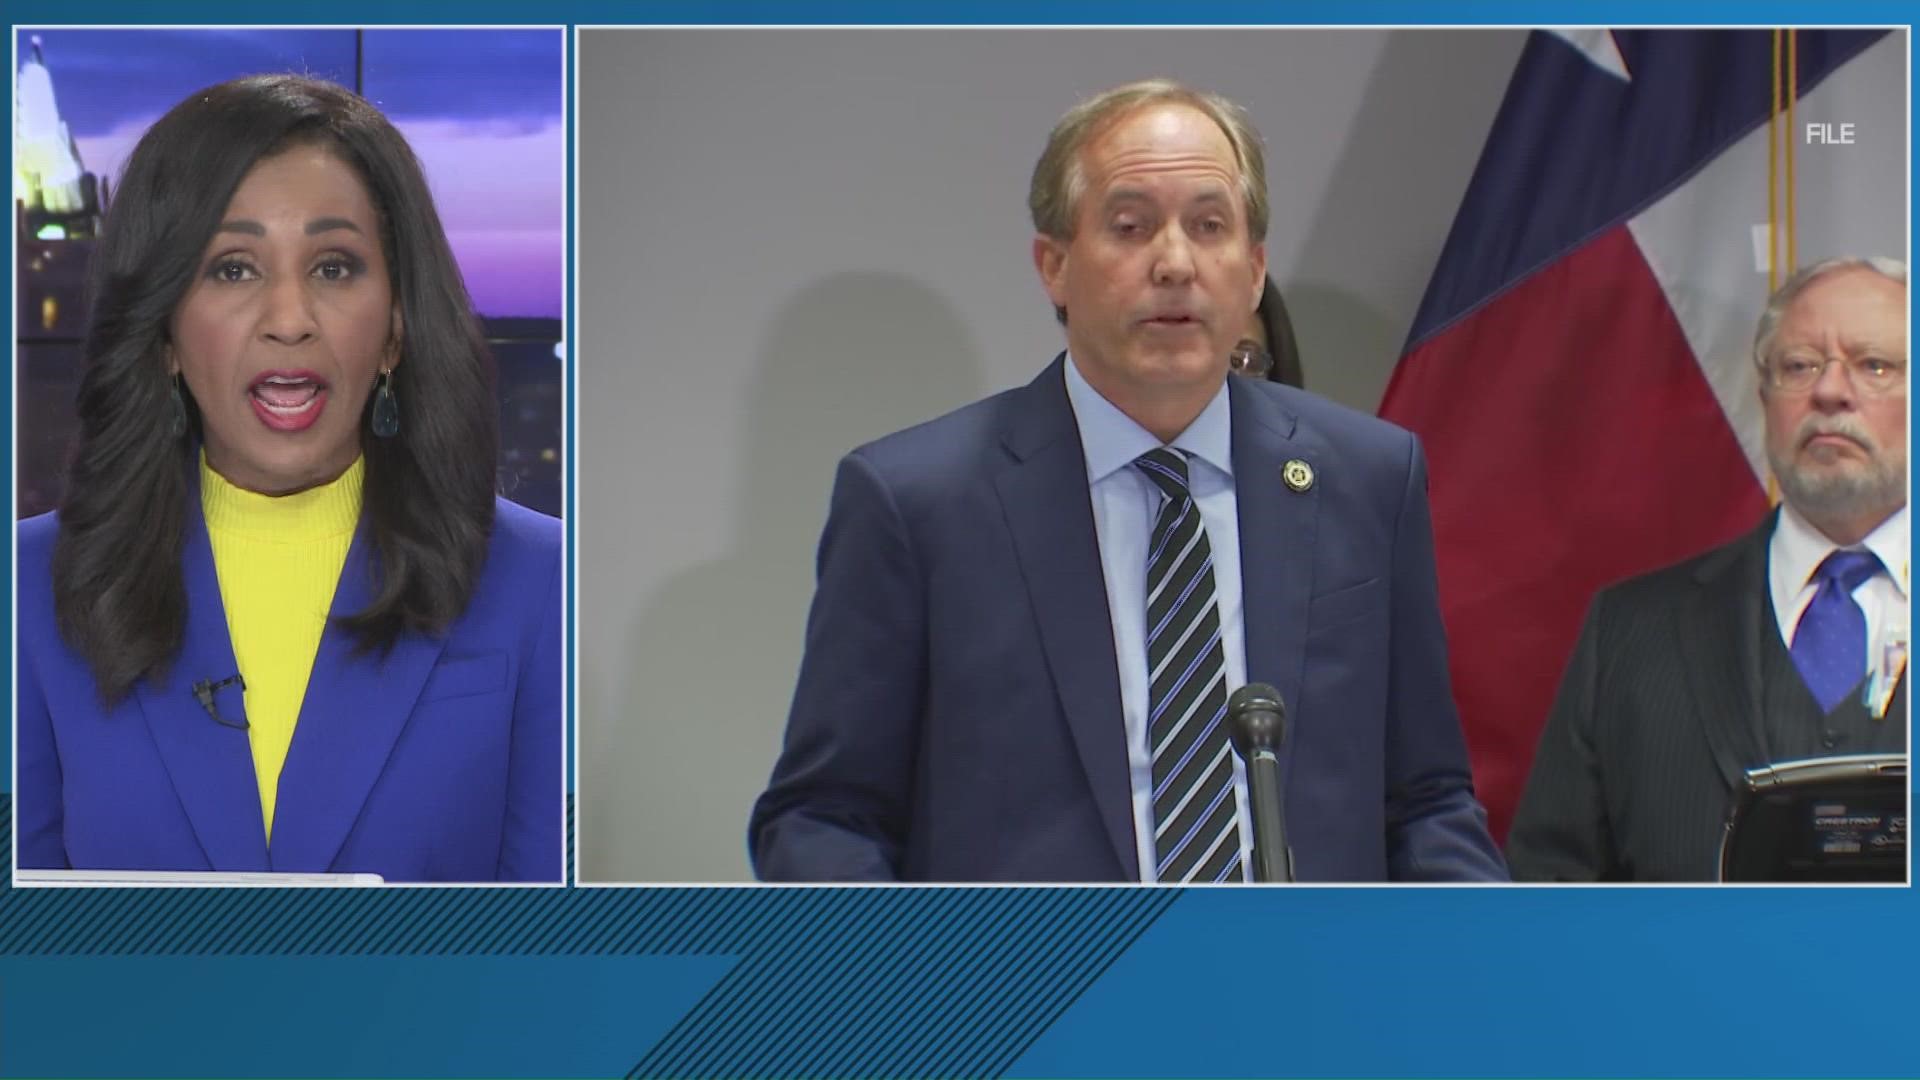 Ken Paxton and 18 other state attorneys general is calling on the DOJ to investigate threats and violence against groups and judges that oppose abortion rights.